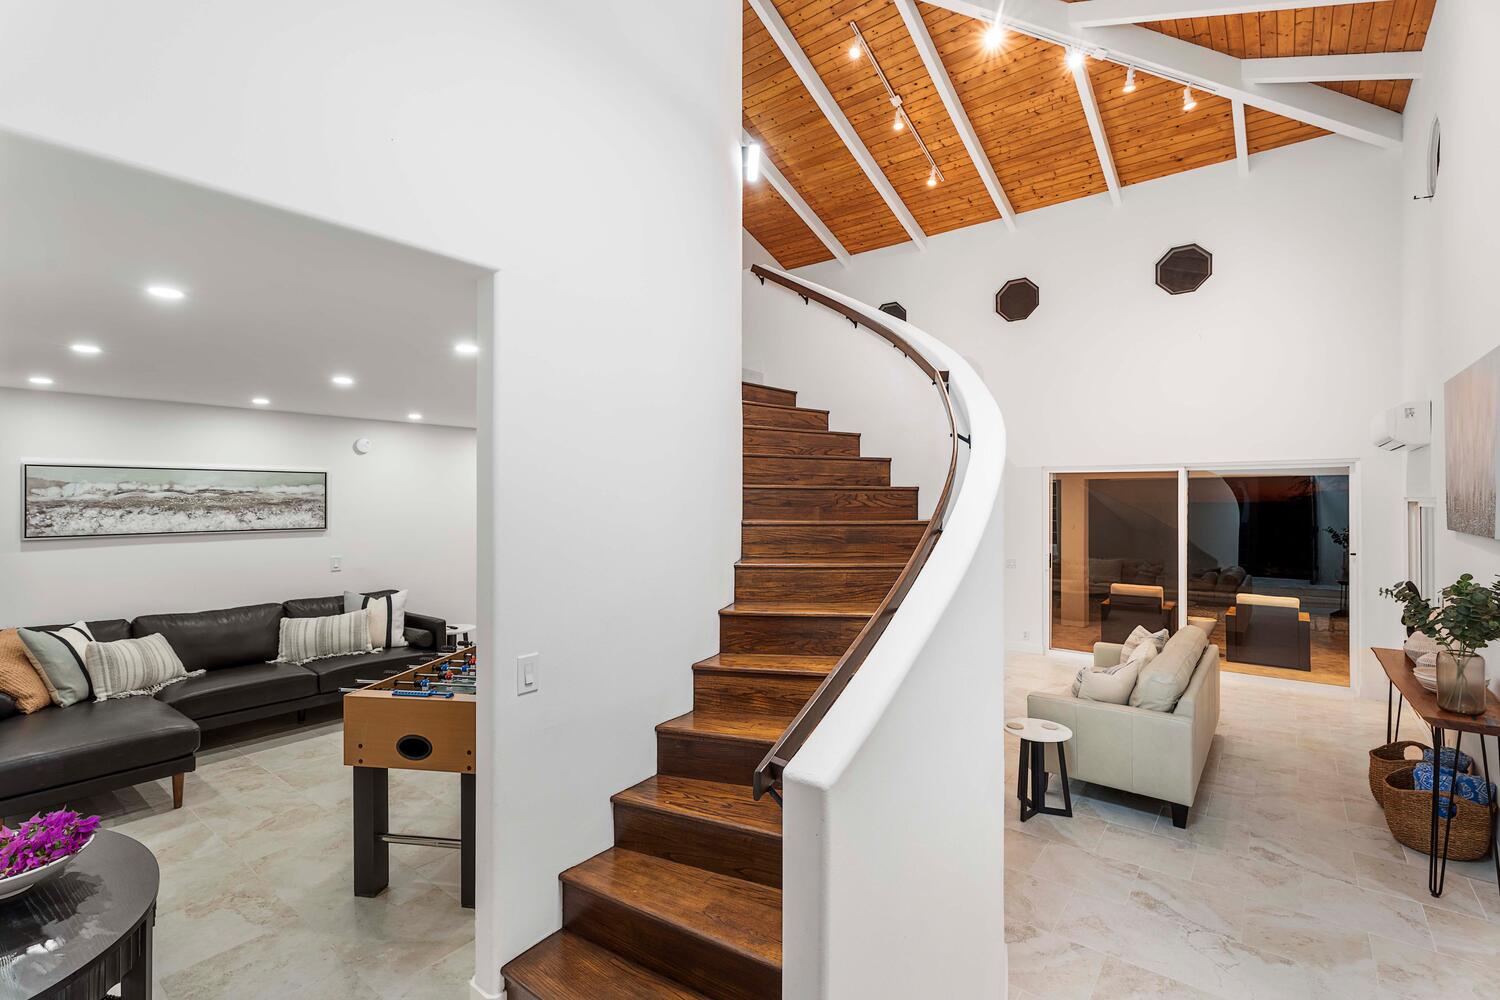 Kailua Kona Vacation Rentals, Ho'okipa Hale - The curvy staircase leading to the nightly spaces.